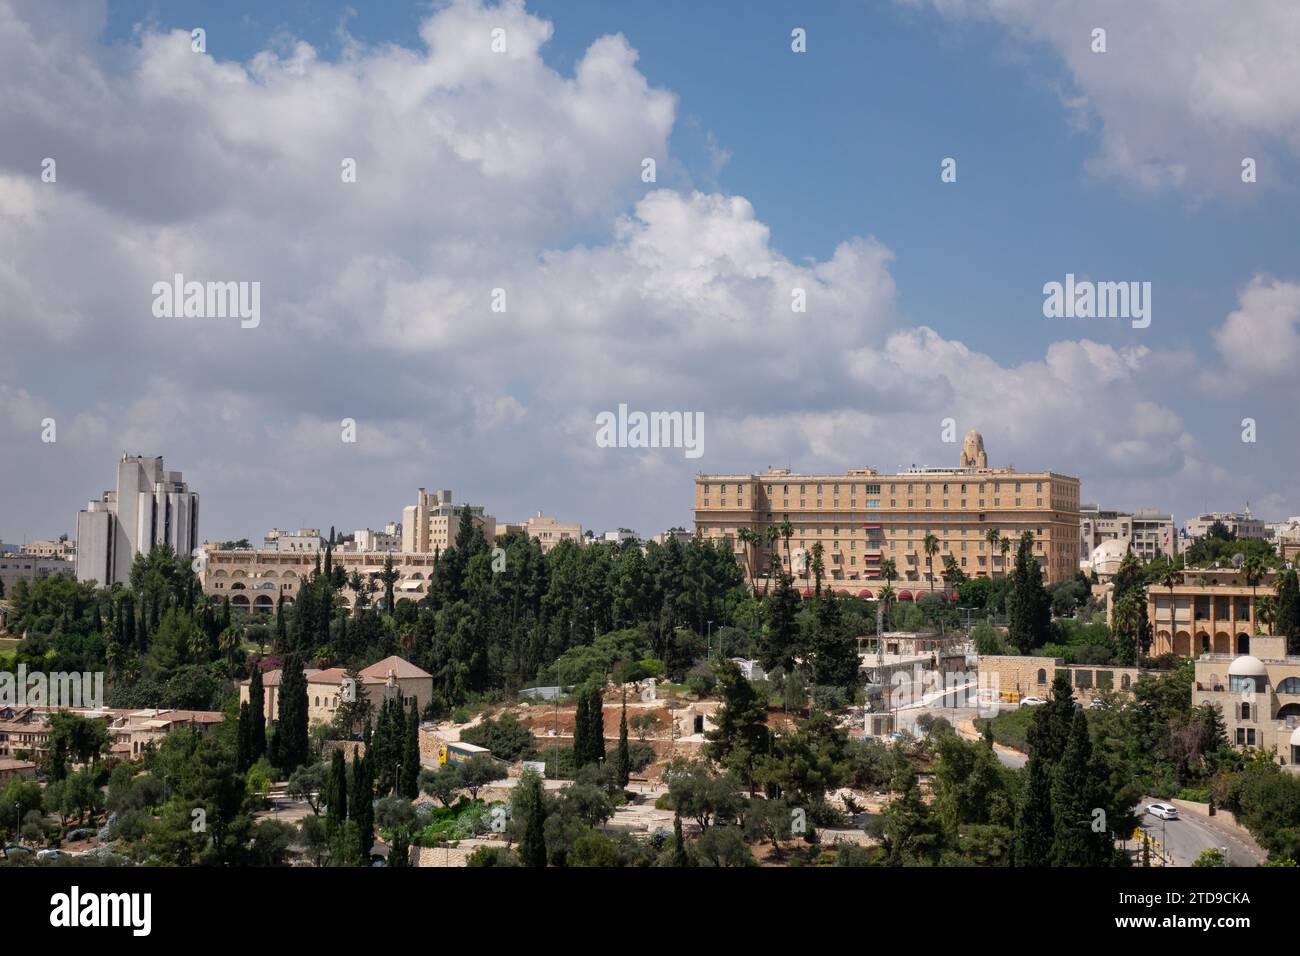 View of Yemin Moshe neighborhood and King David Hotel in Jerusalem during a cloudy Summer day. Stock Photo